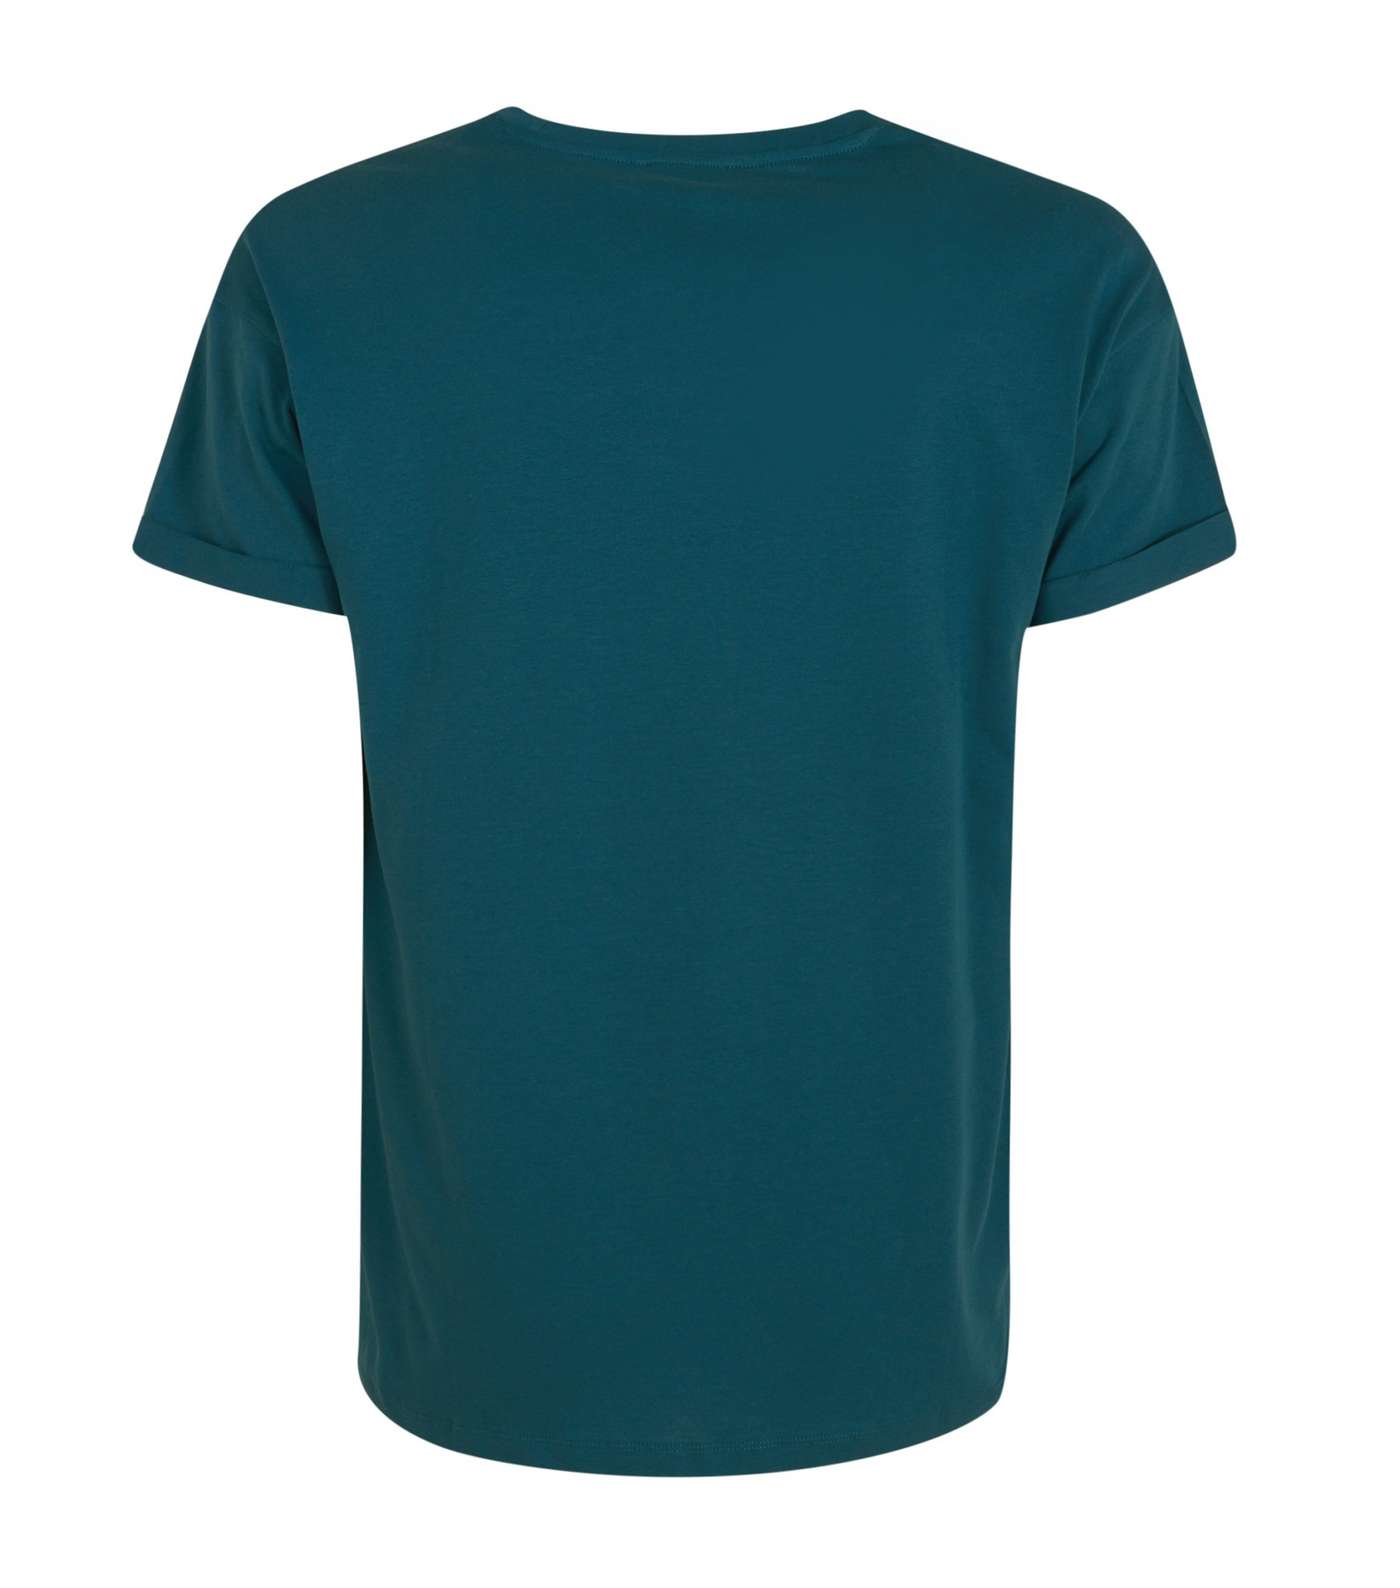 Teal Rose Embroidered Short Sleeve T-Shirt Image 2